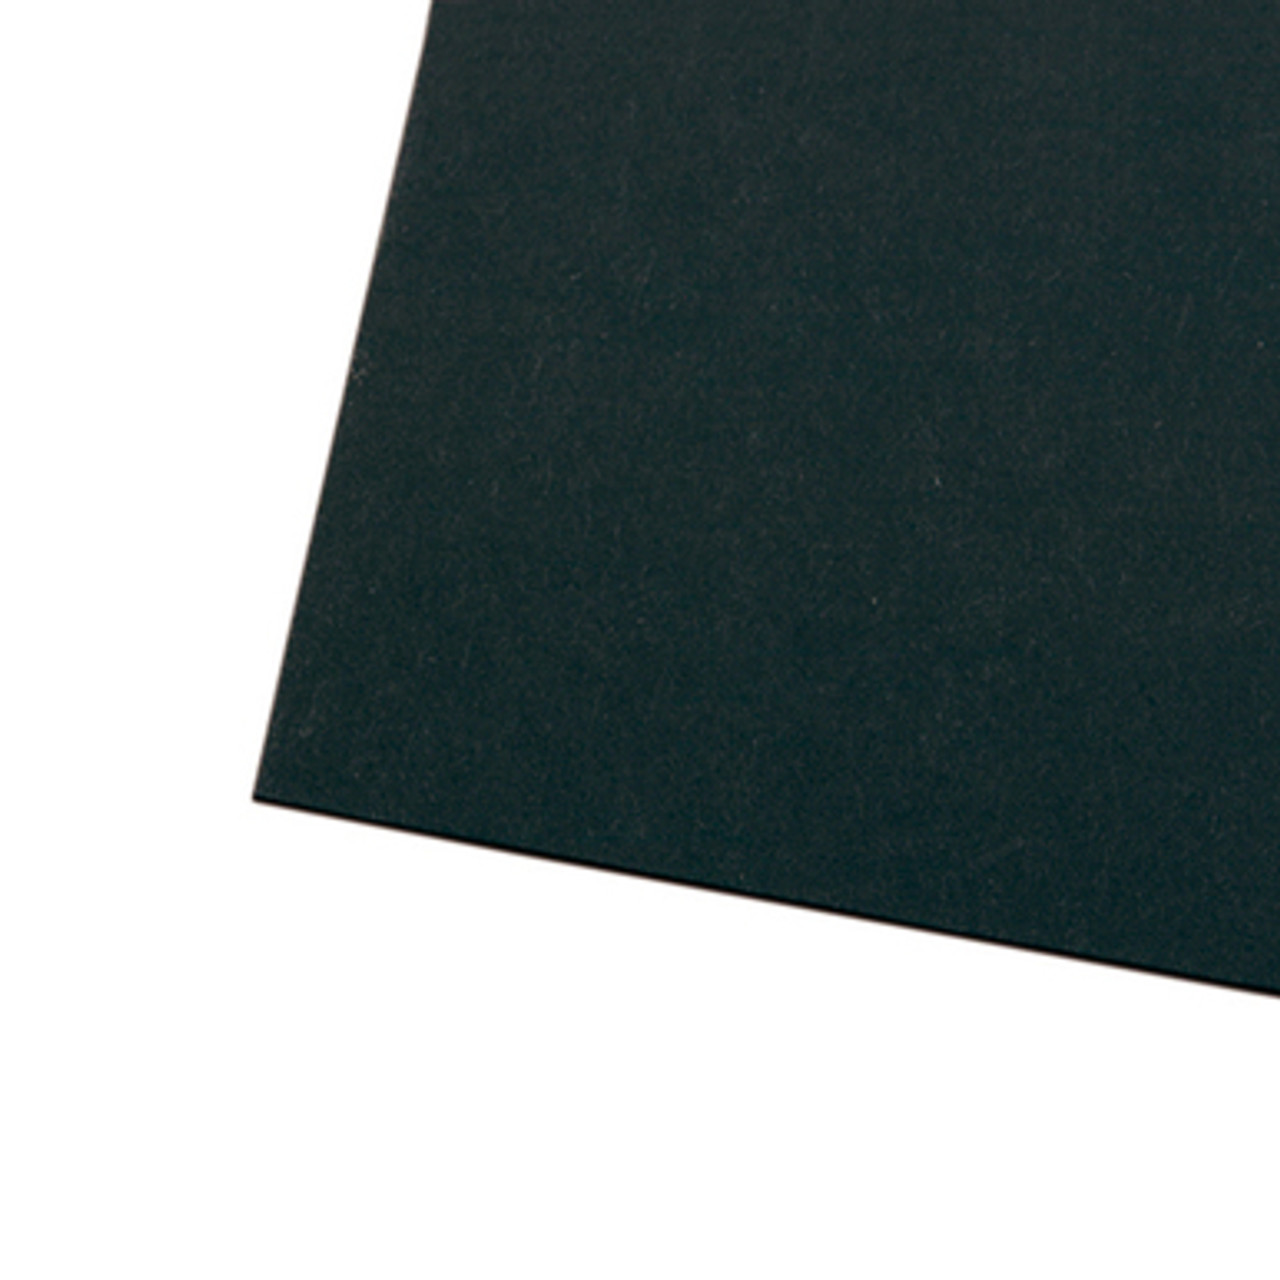 Black Surface board 1000gsm 760x1020mm.